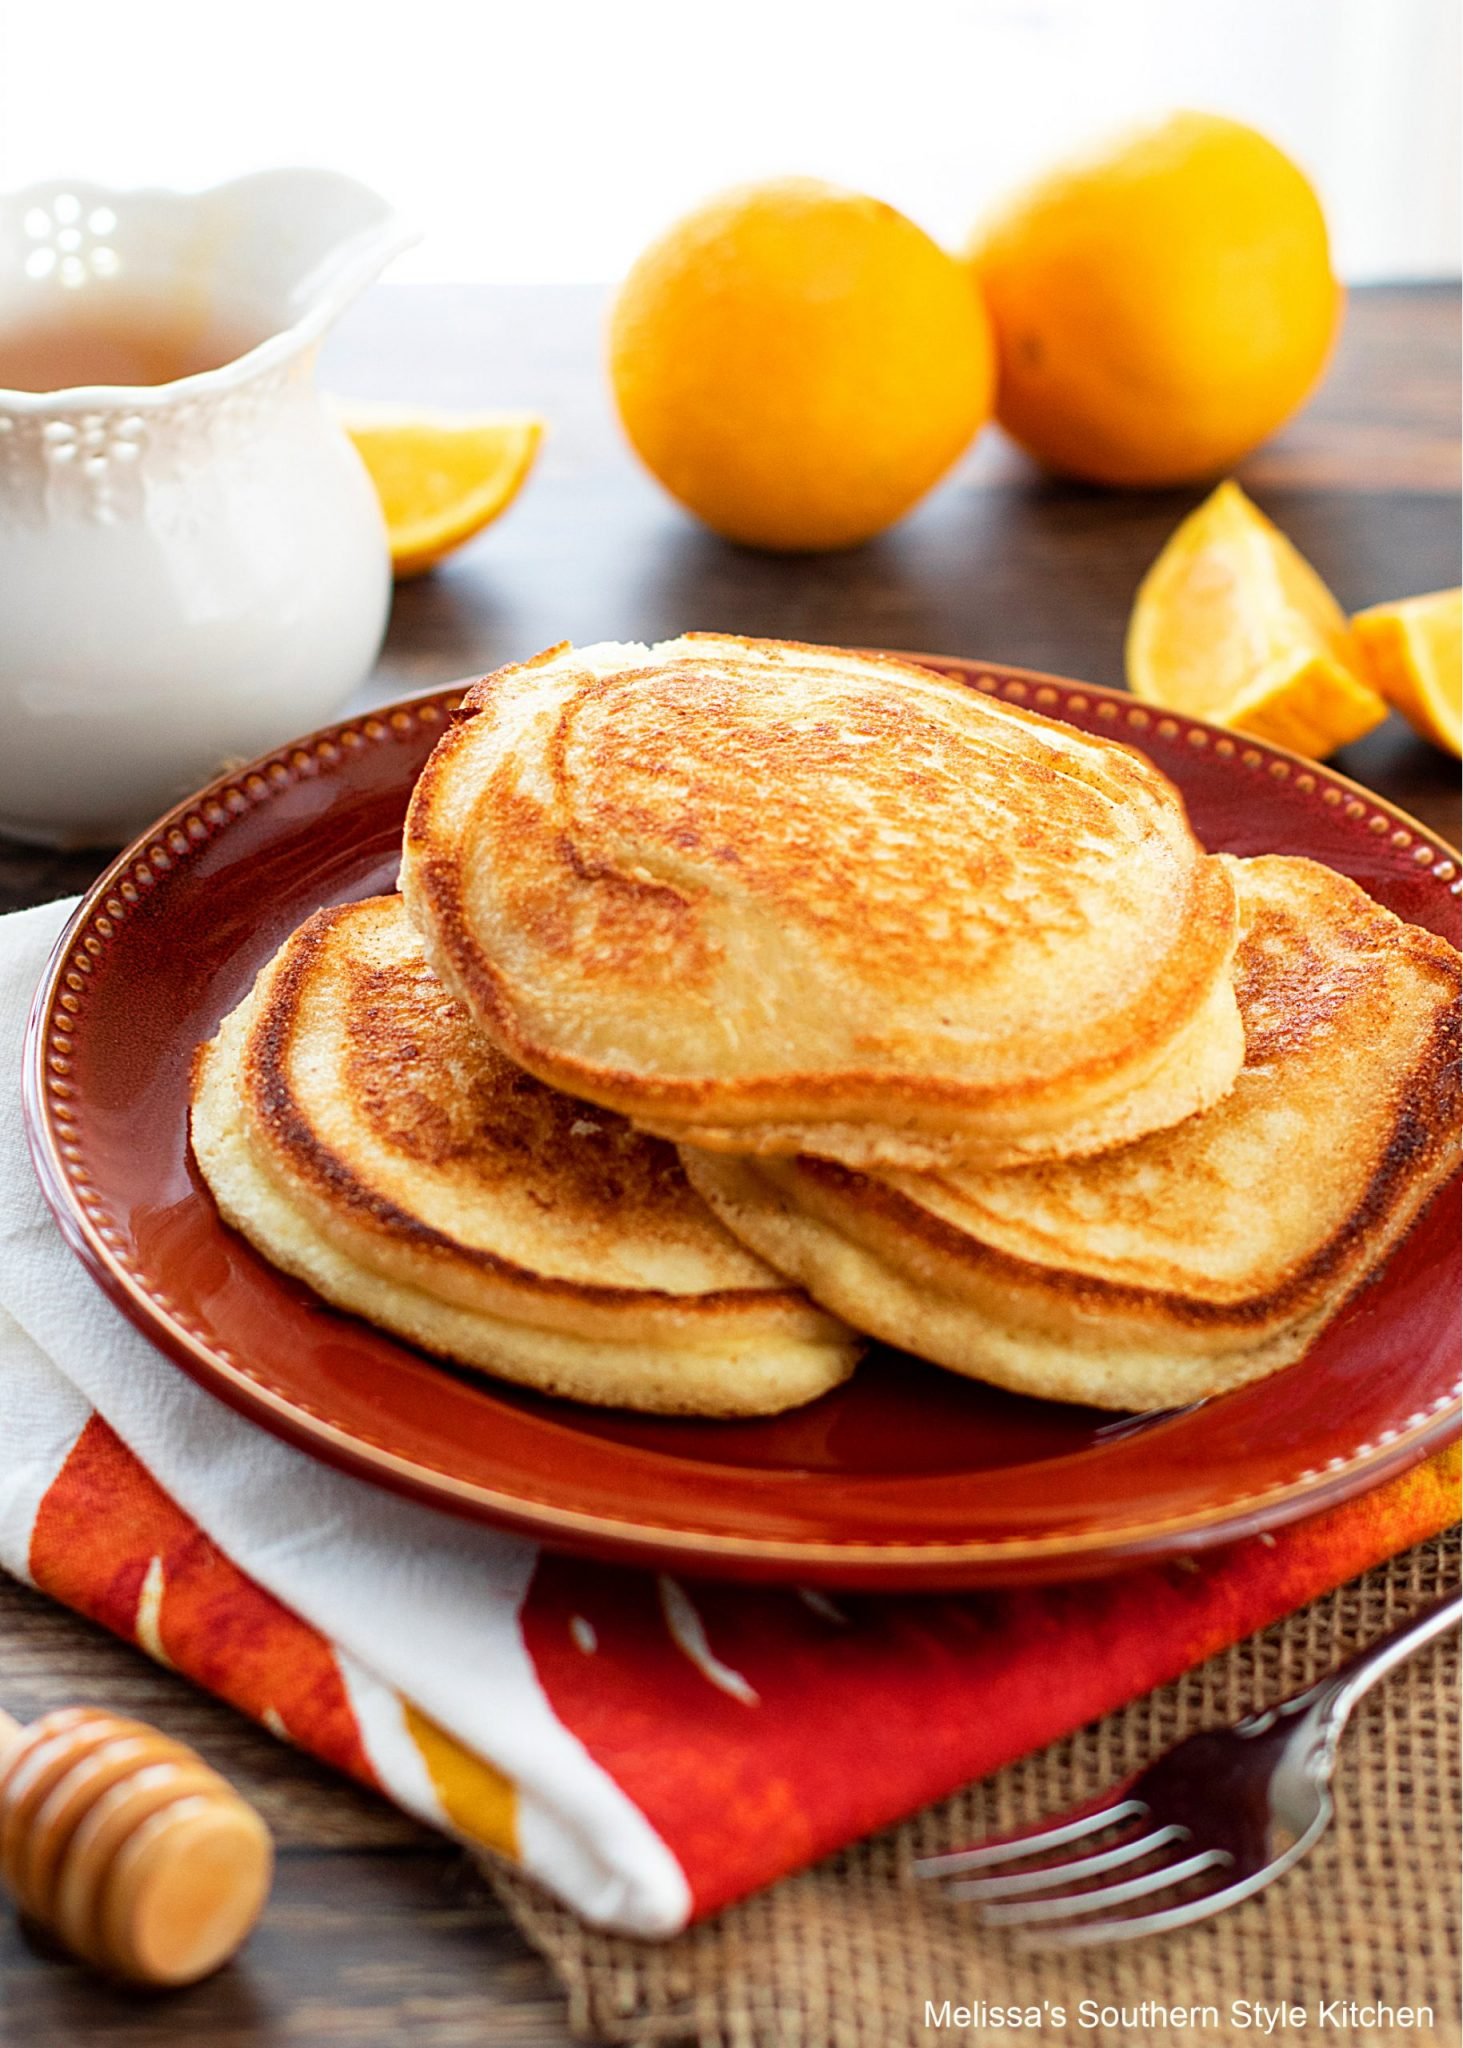 cooked johnnycakes on a red plate with orange wedges and a fork